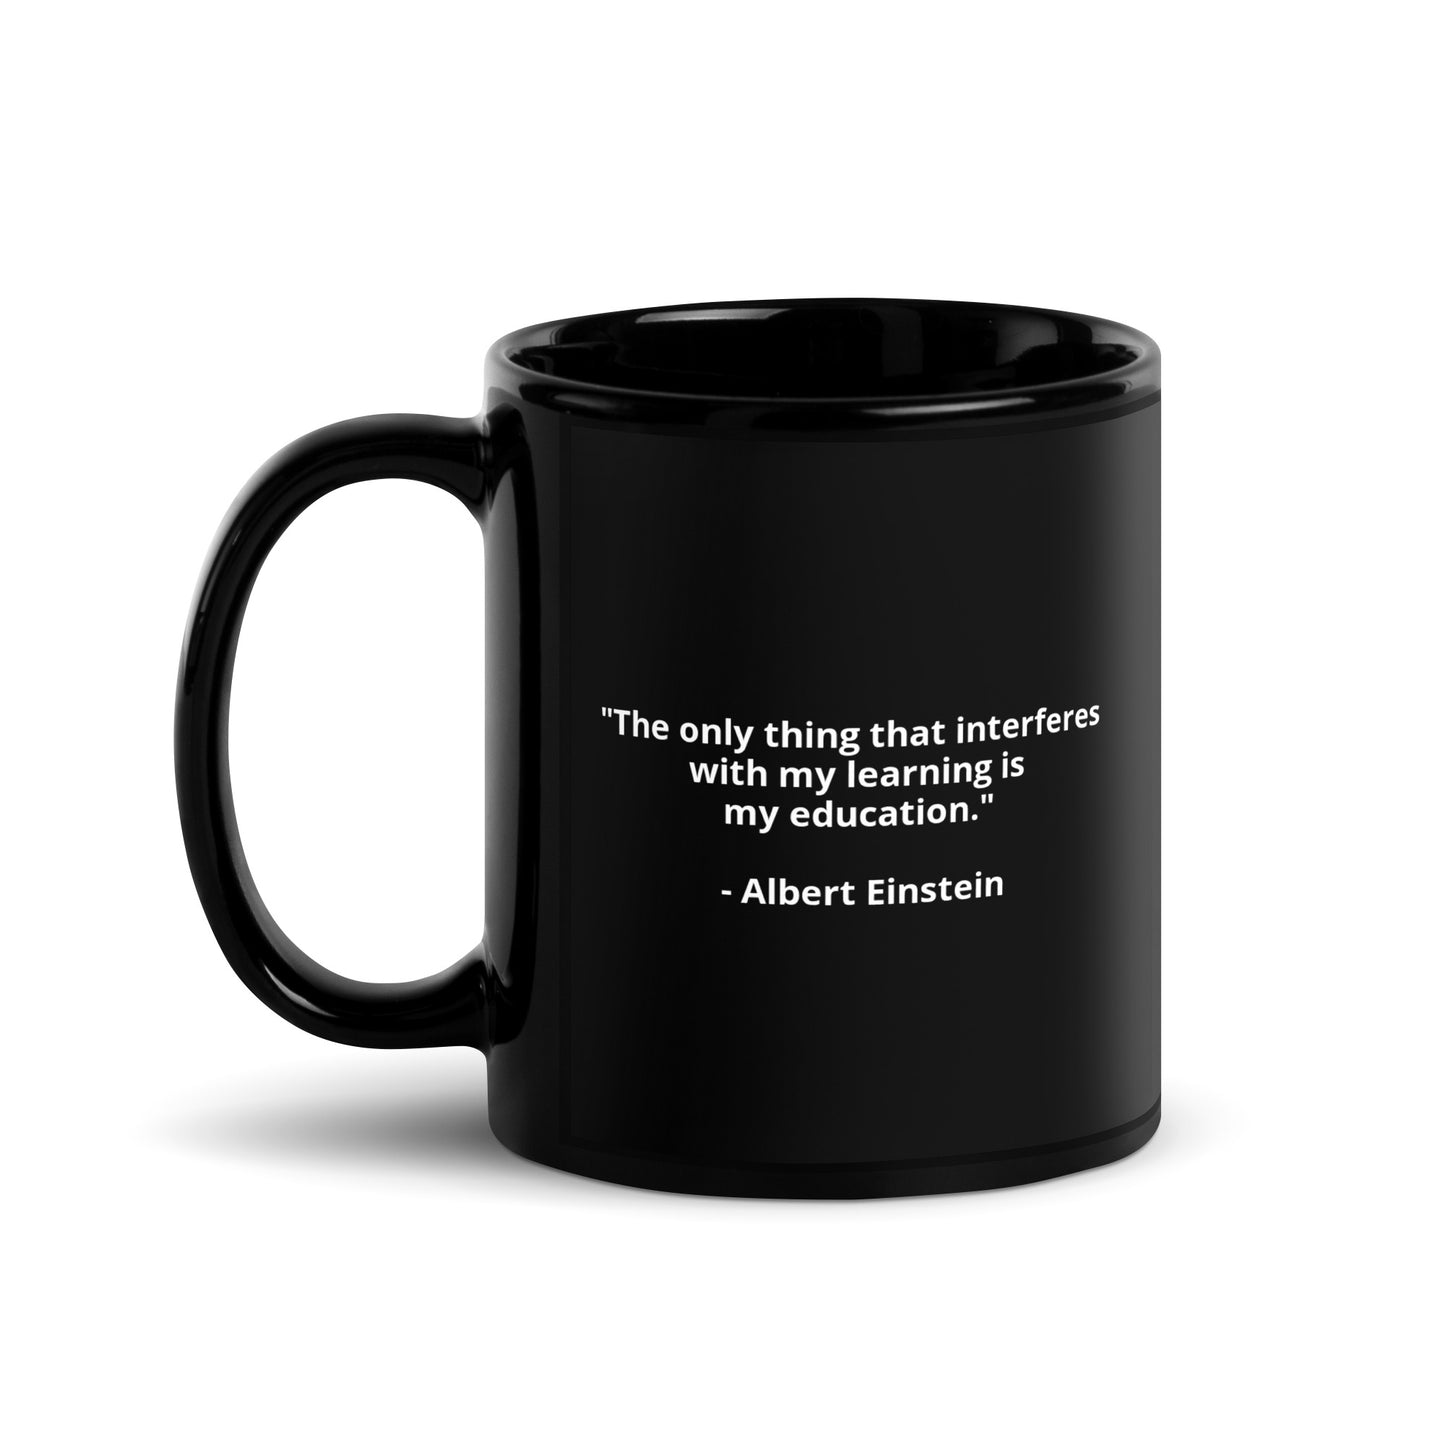 "The only thing that interferes with my learning is my education." - Albert Einstein - Black Glossy Mug